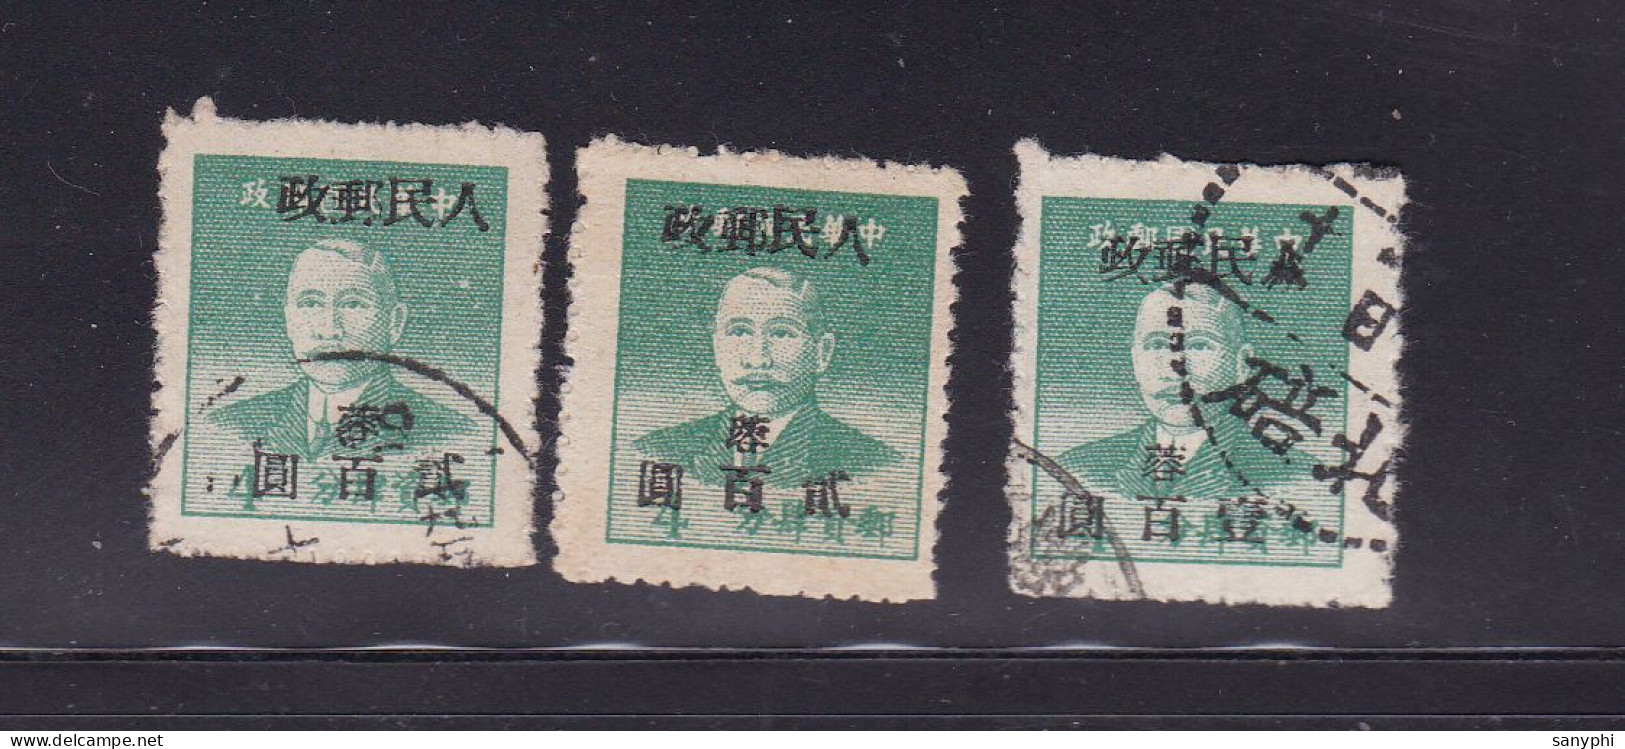 China Chine 1950 Gold Yuan Optd West Sichuan People's Posts 3 Used Stamps - China Oriental 1949-50